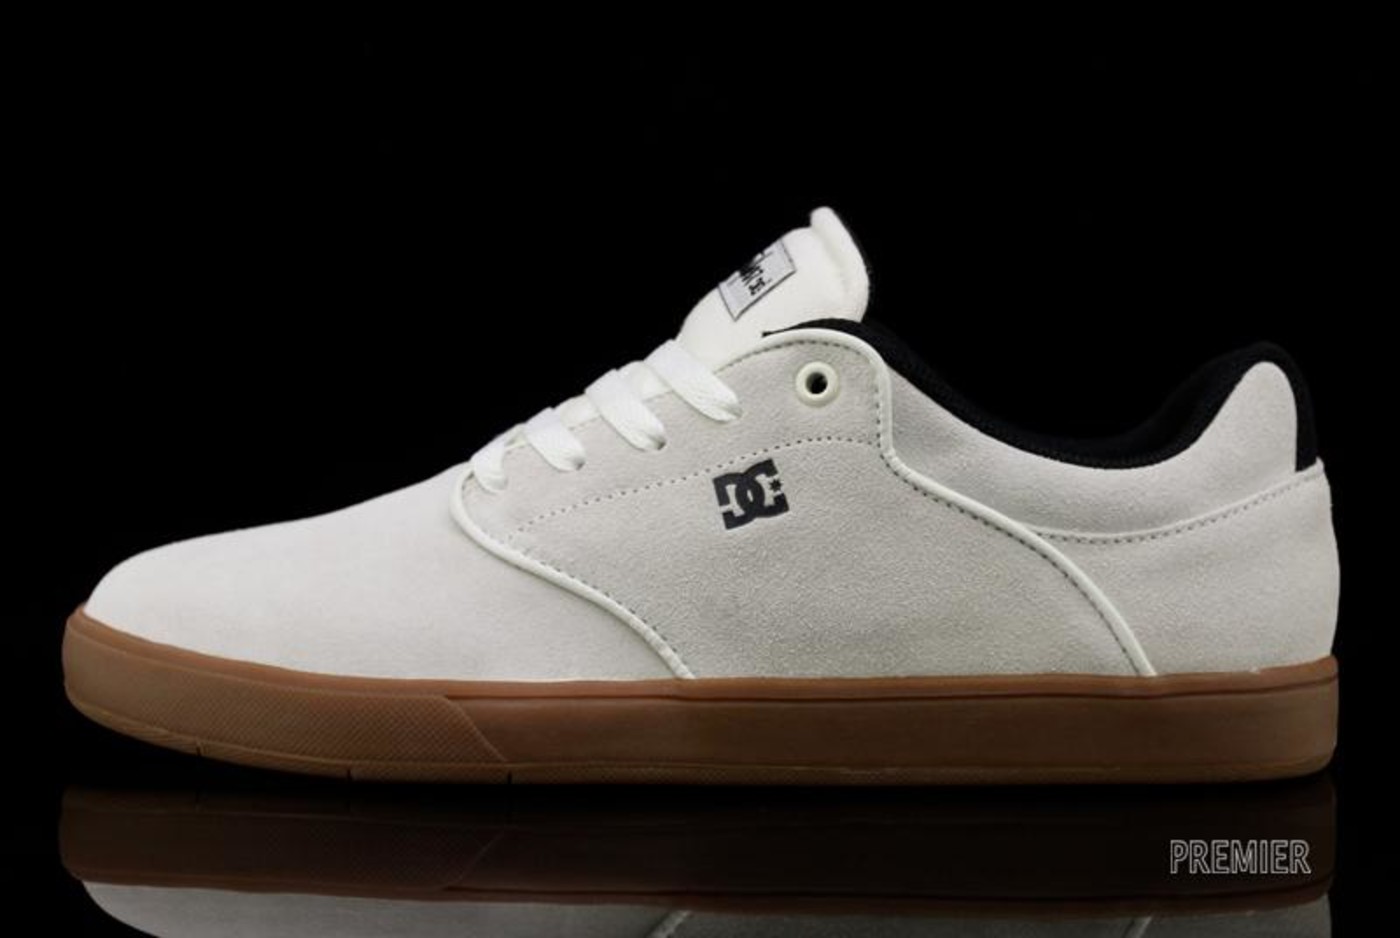 Day: DC Shoes Mikey Taylor S \